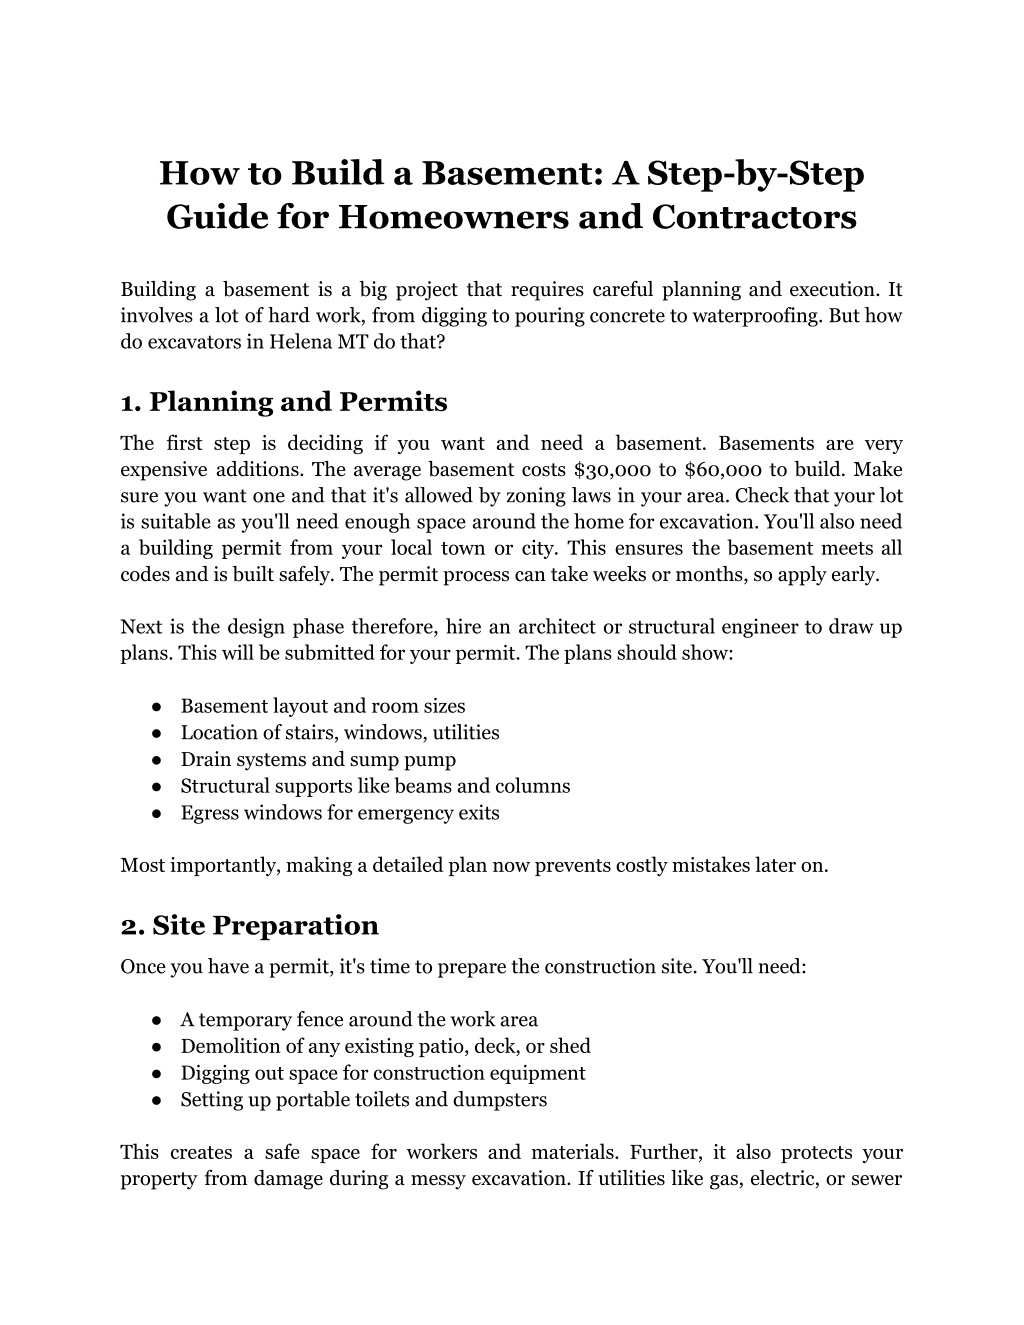 how to build a basement a step by step guide l.w